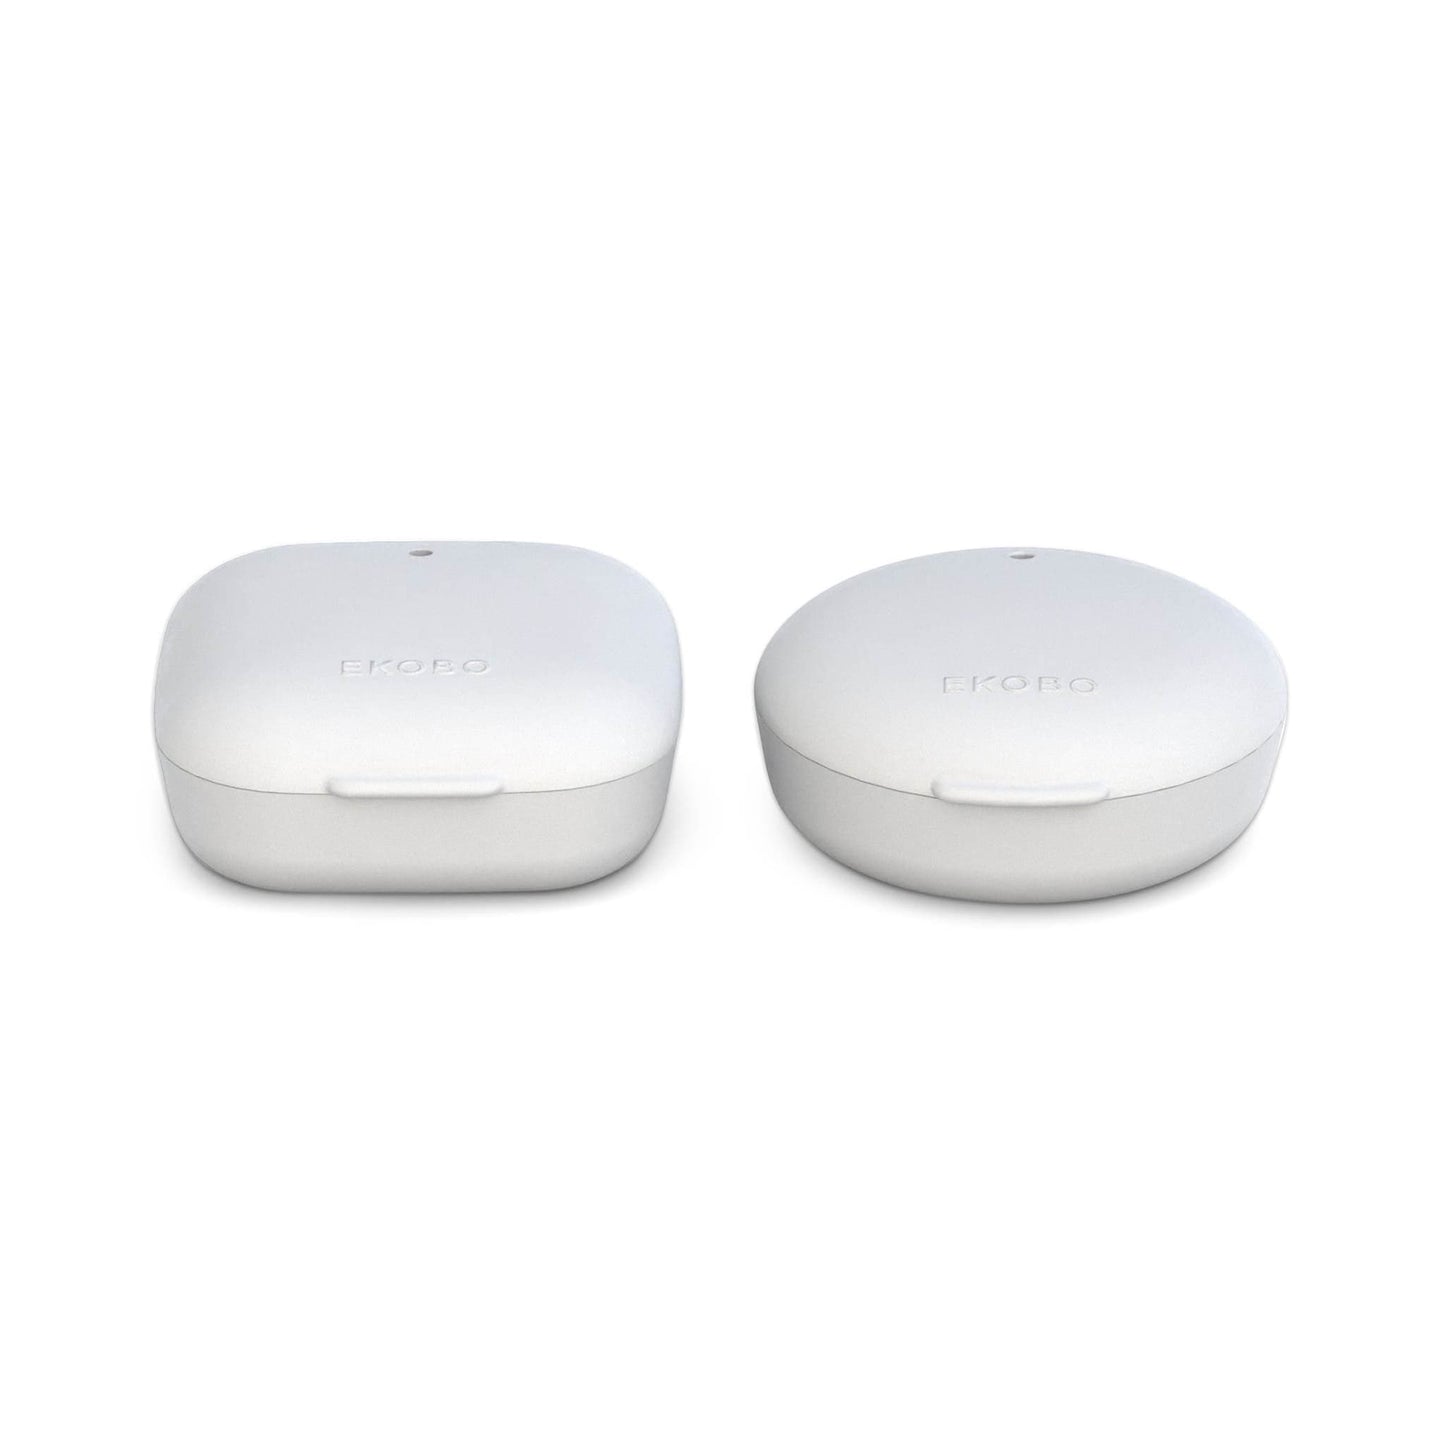 Faerly Soap Dishes & Holders Duo of Travel Soap Boxes - Cloud Grey - Ekobo